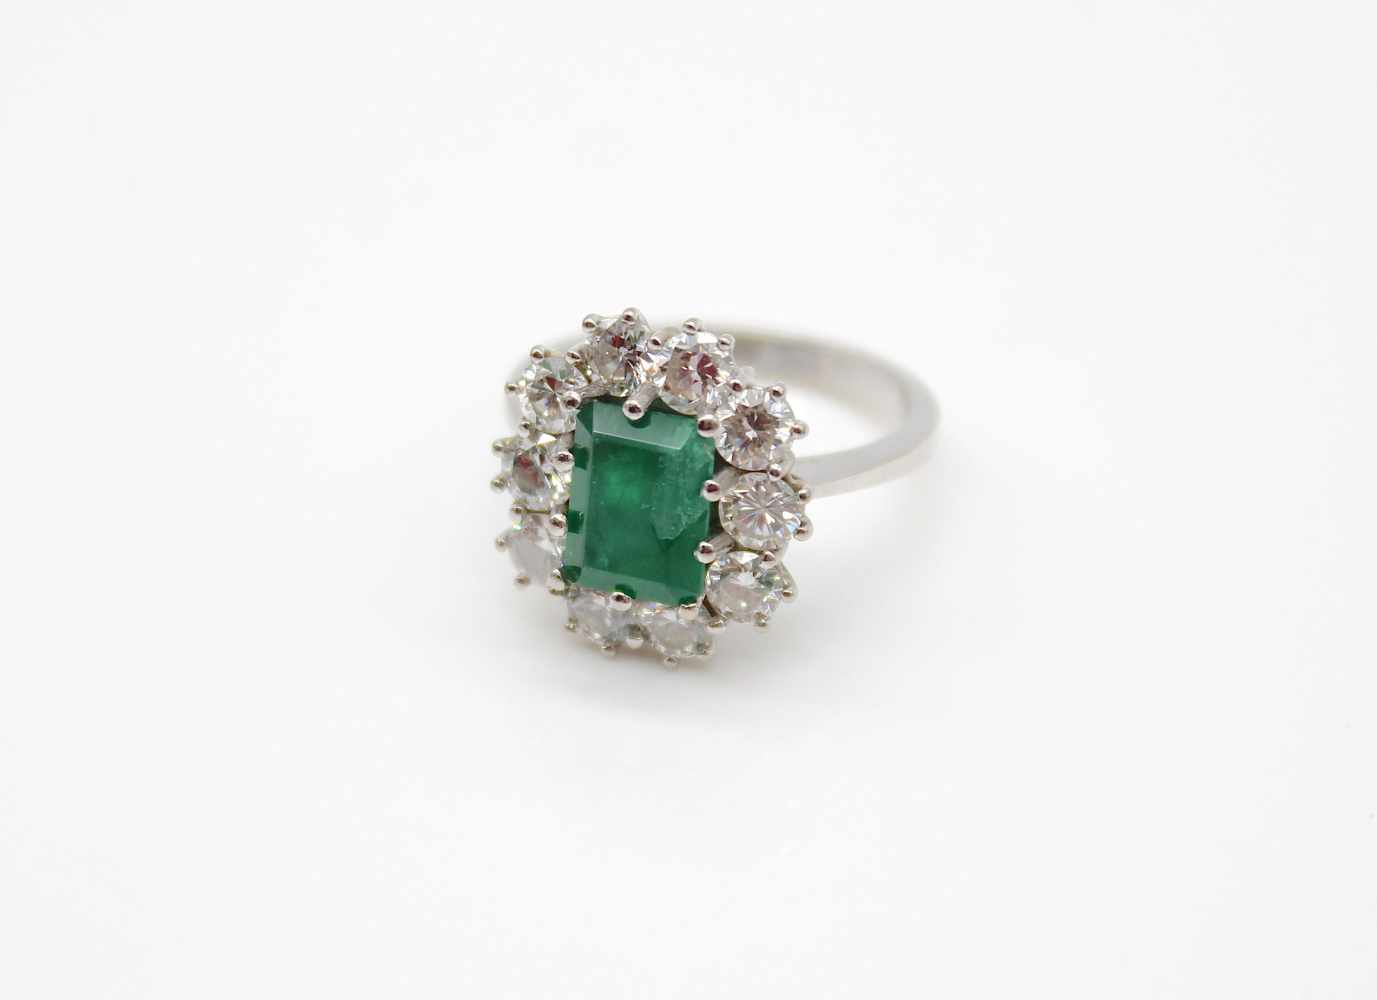 Ring made of 585 white gold with an emerald of approx. 2.1 ct and 10 diamonds, total approx. 1.9 ct, - Image 2 of 3